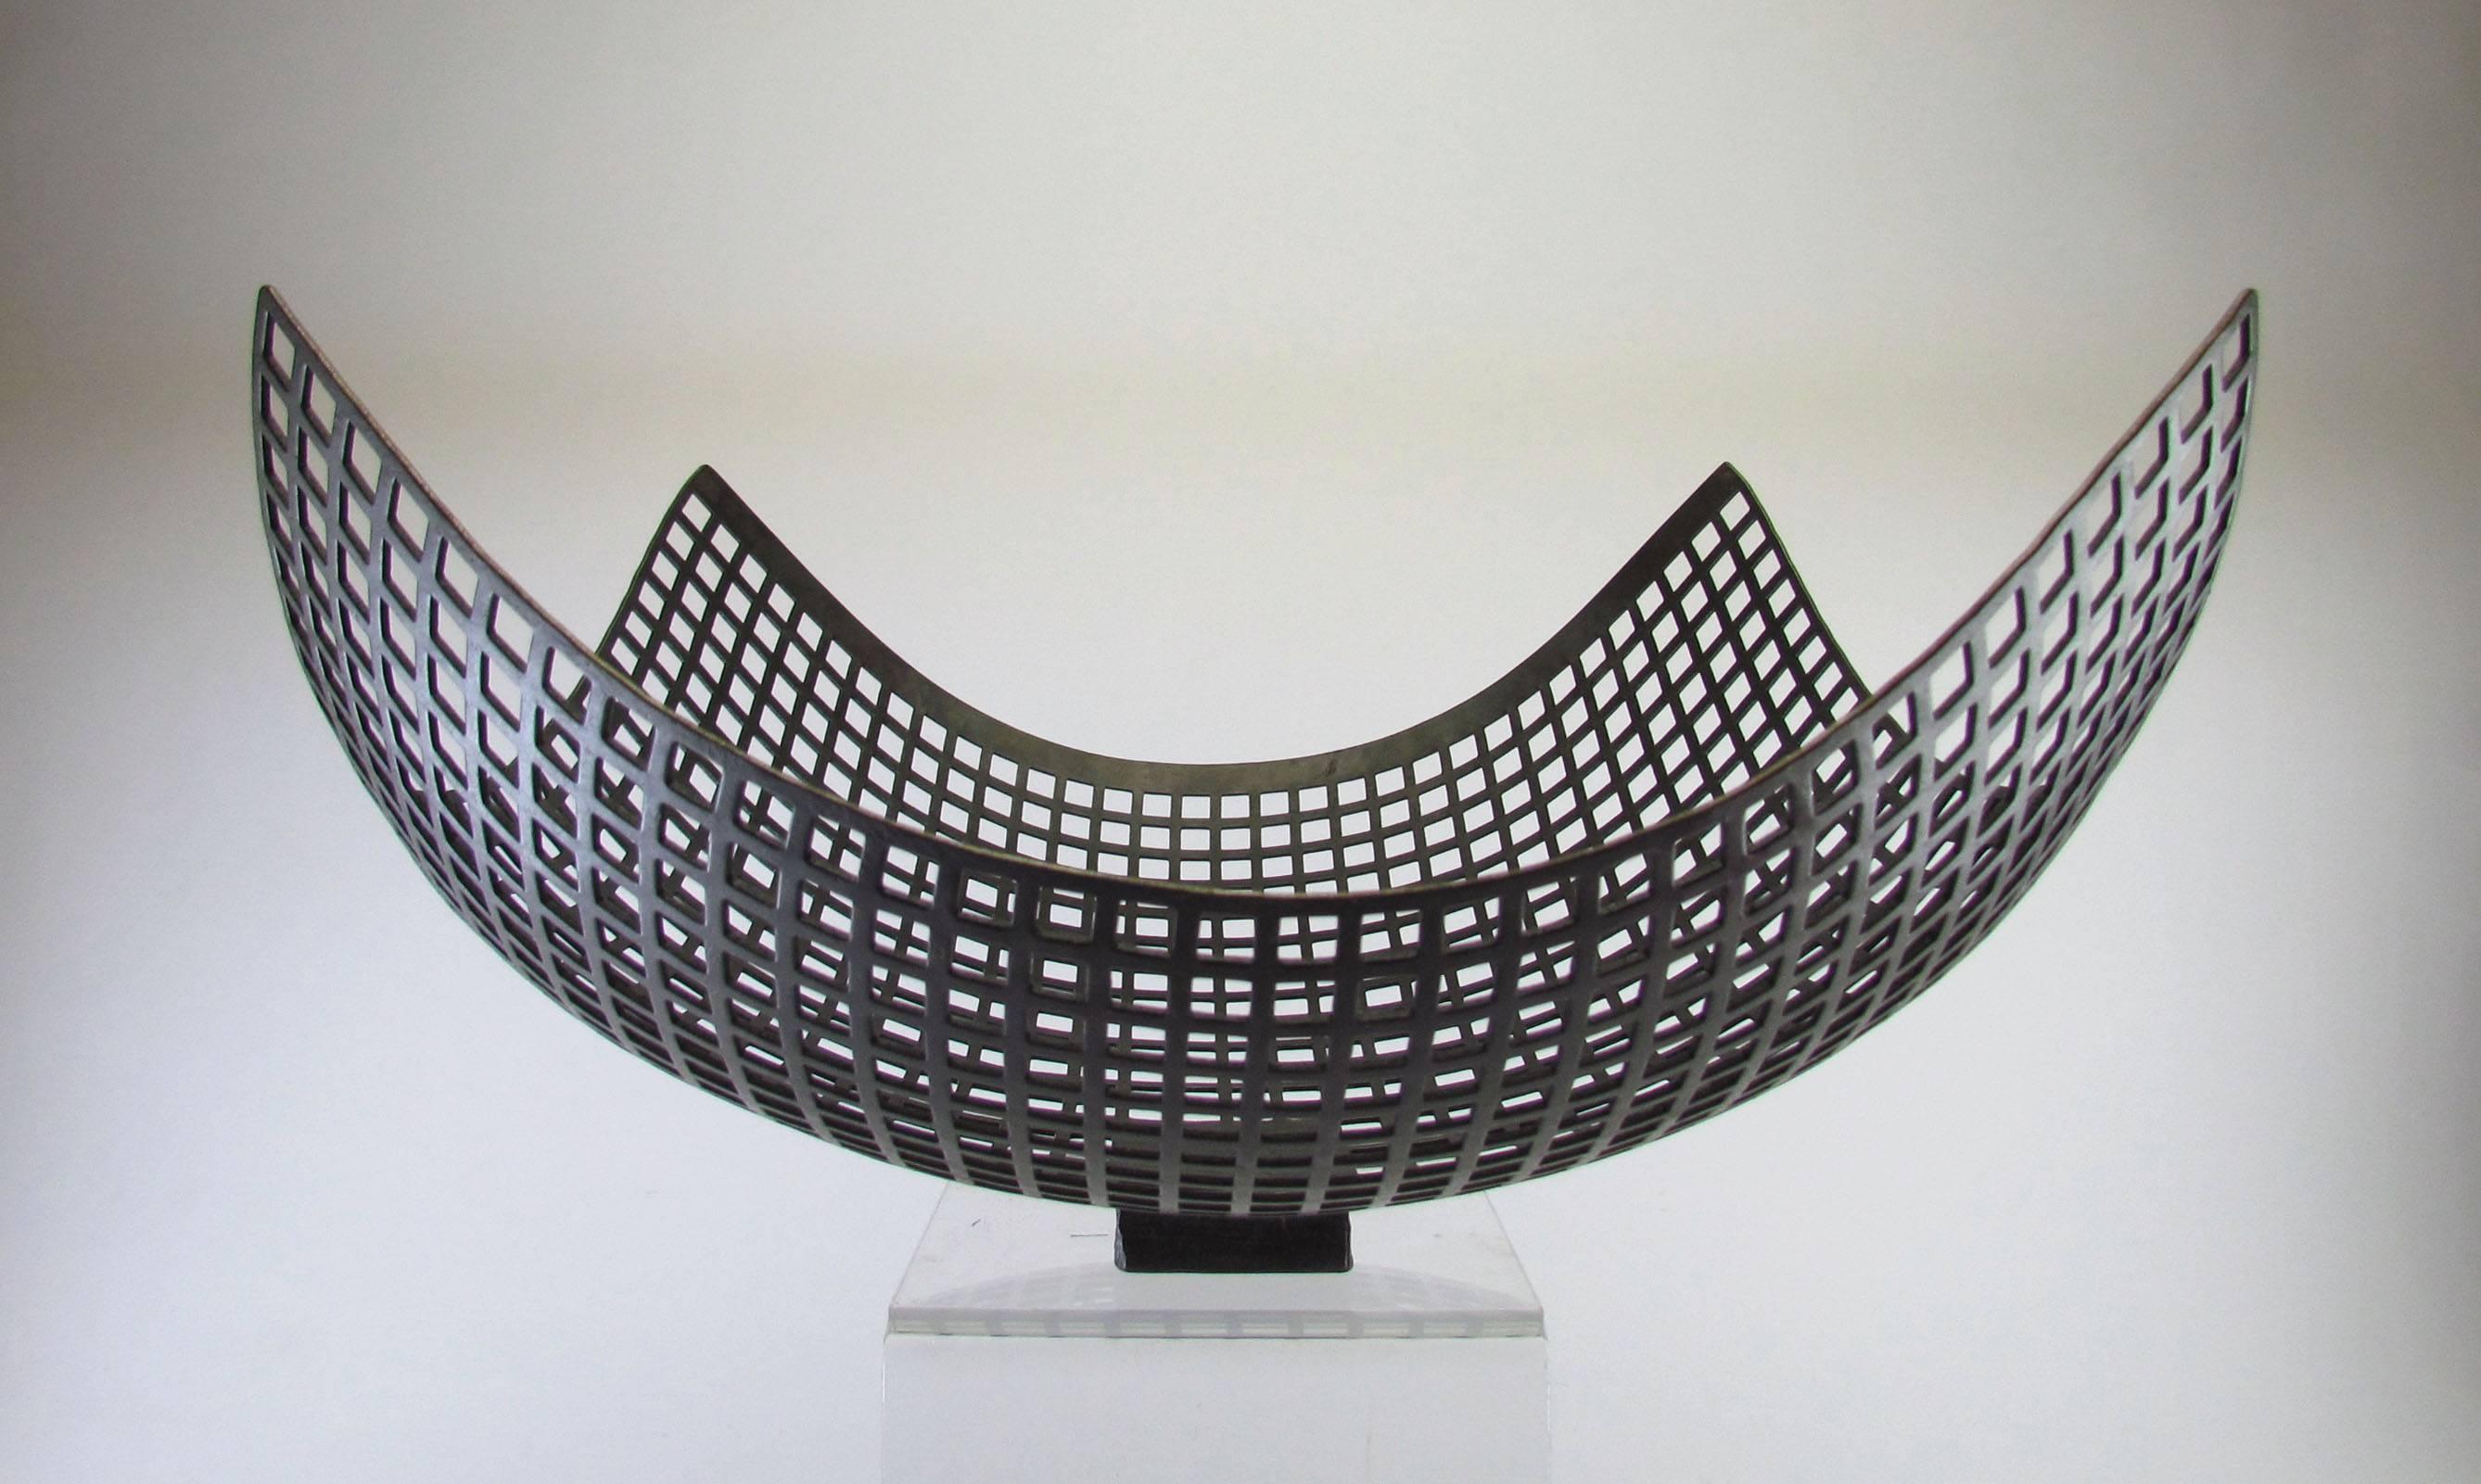 Sculptural centerpiece bowl in wrought iron by metalsmith Lars Larsson, Sweden, ca. 1970s.

Larsson, a sculptor whose work is represented in numerous art museums in Sweden also created very limited quantities of hand-wrought utilitarian wares.  He